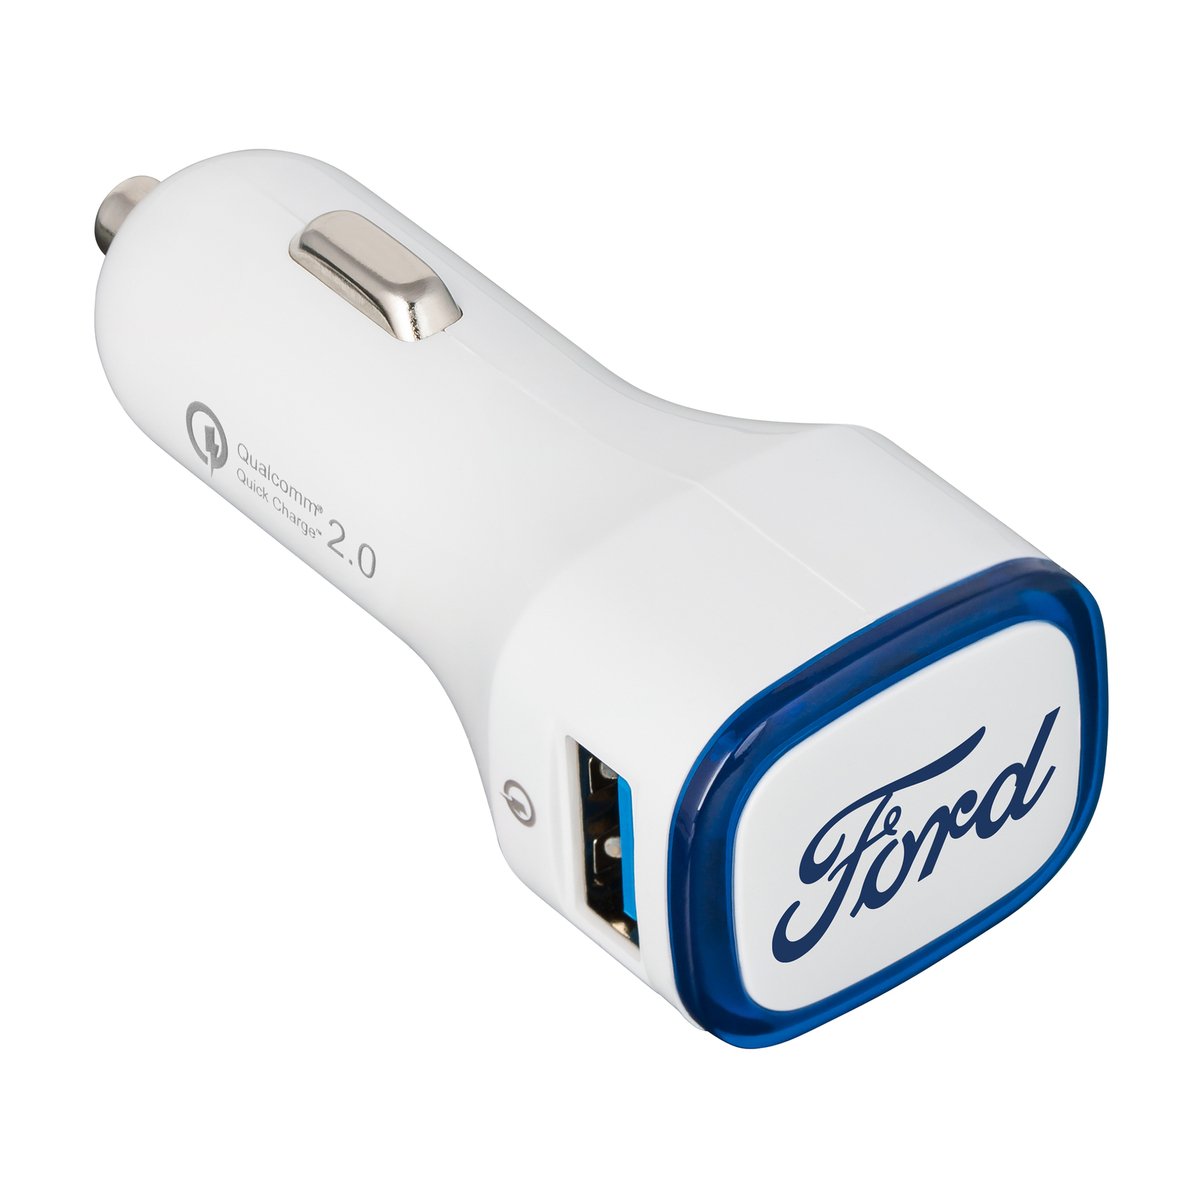 USB-Autoladeadapter Quick Charge 2.0® COLLECTION 500 blau